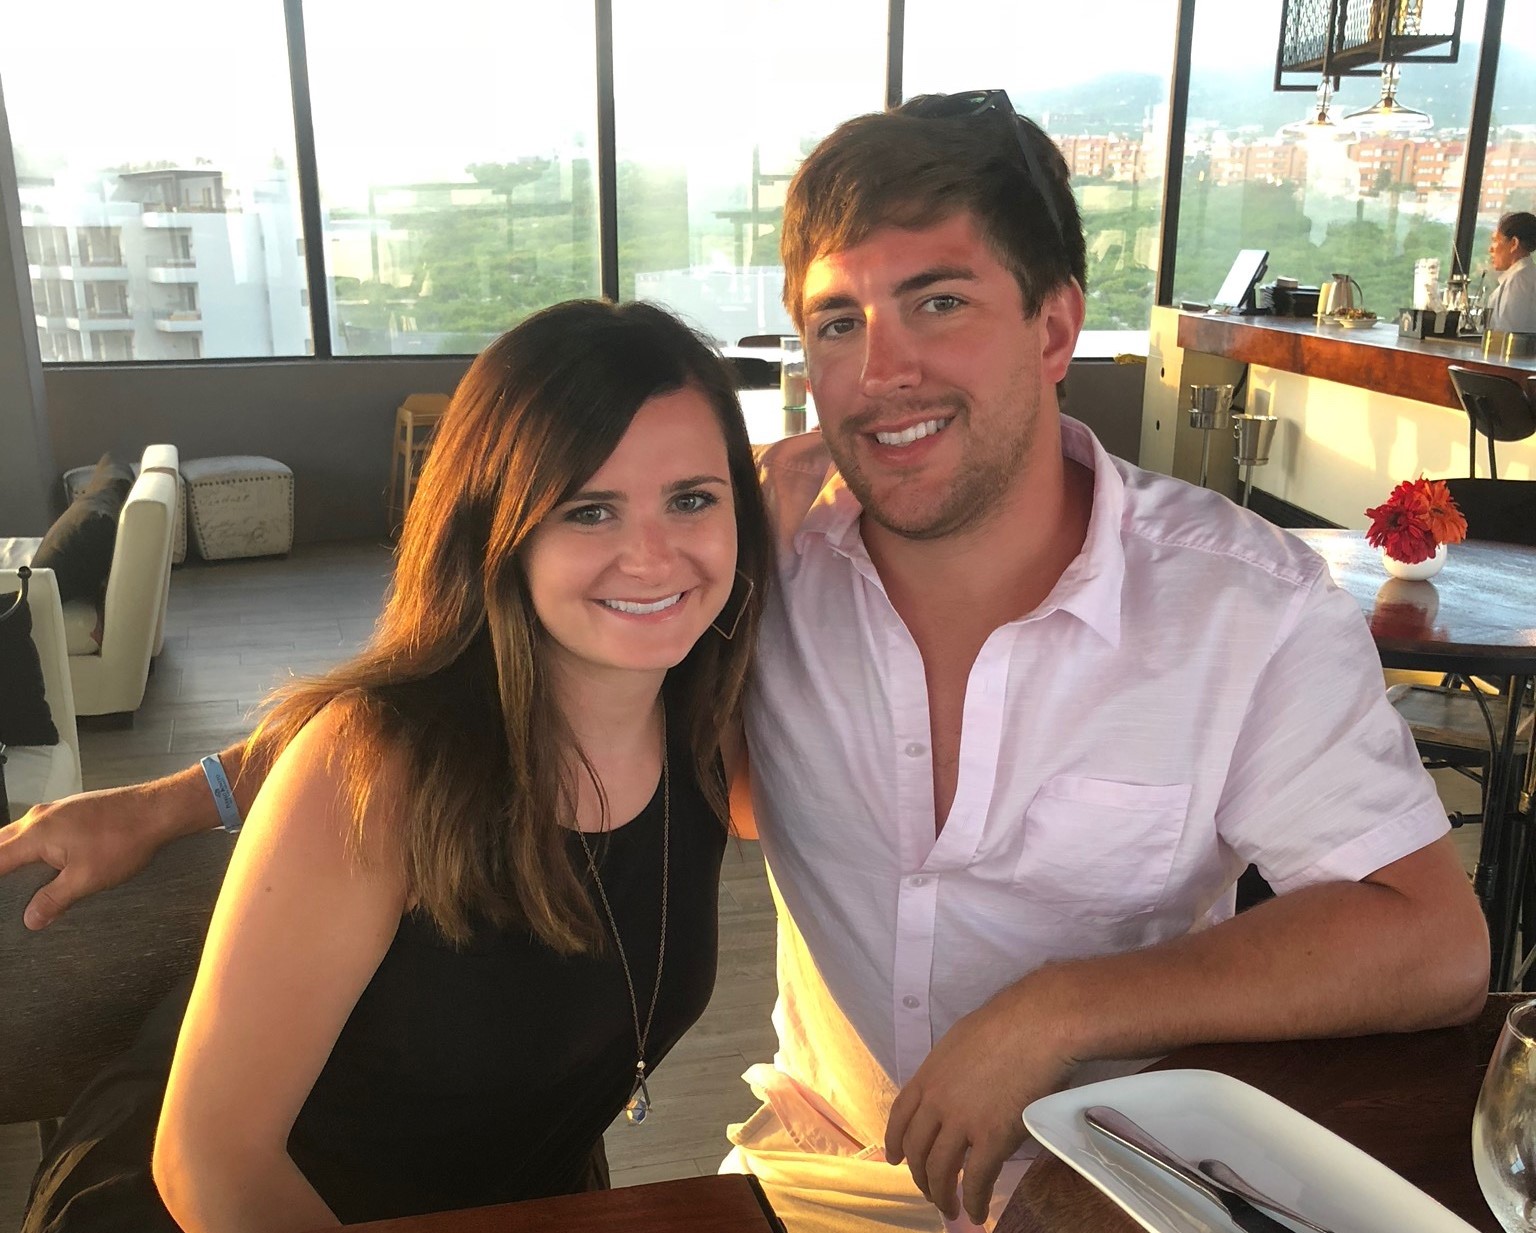 Brendan Postle (right) sits with girlfriend at restaurant